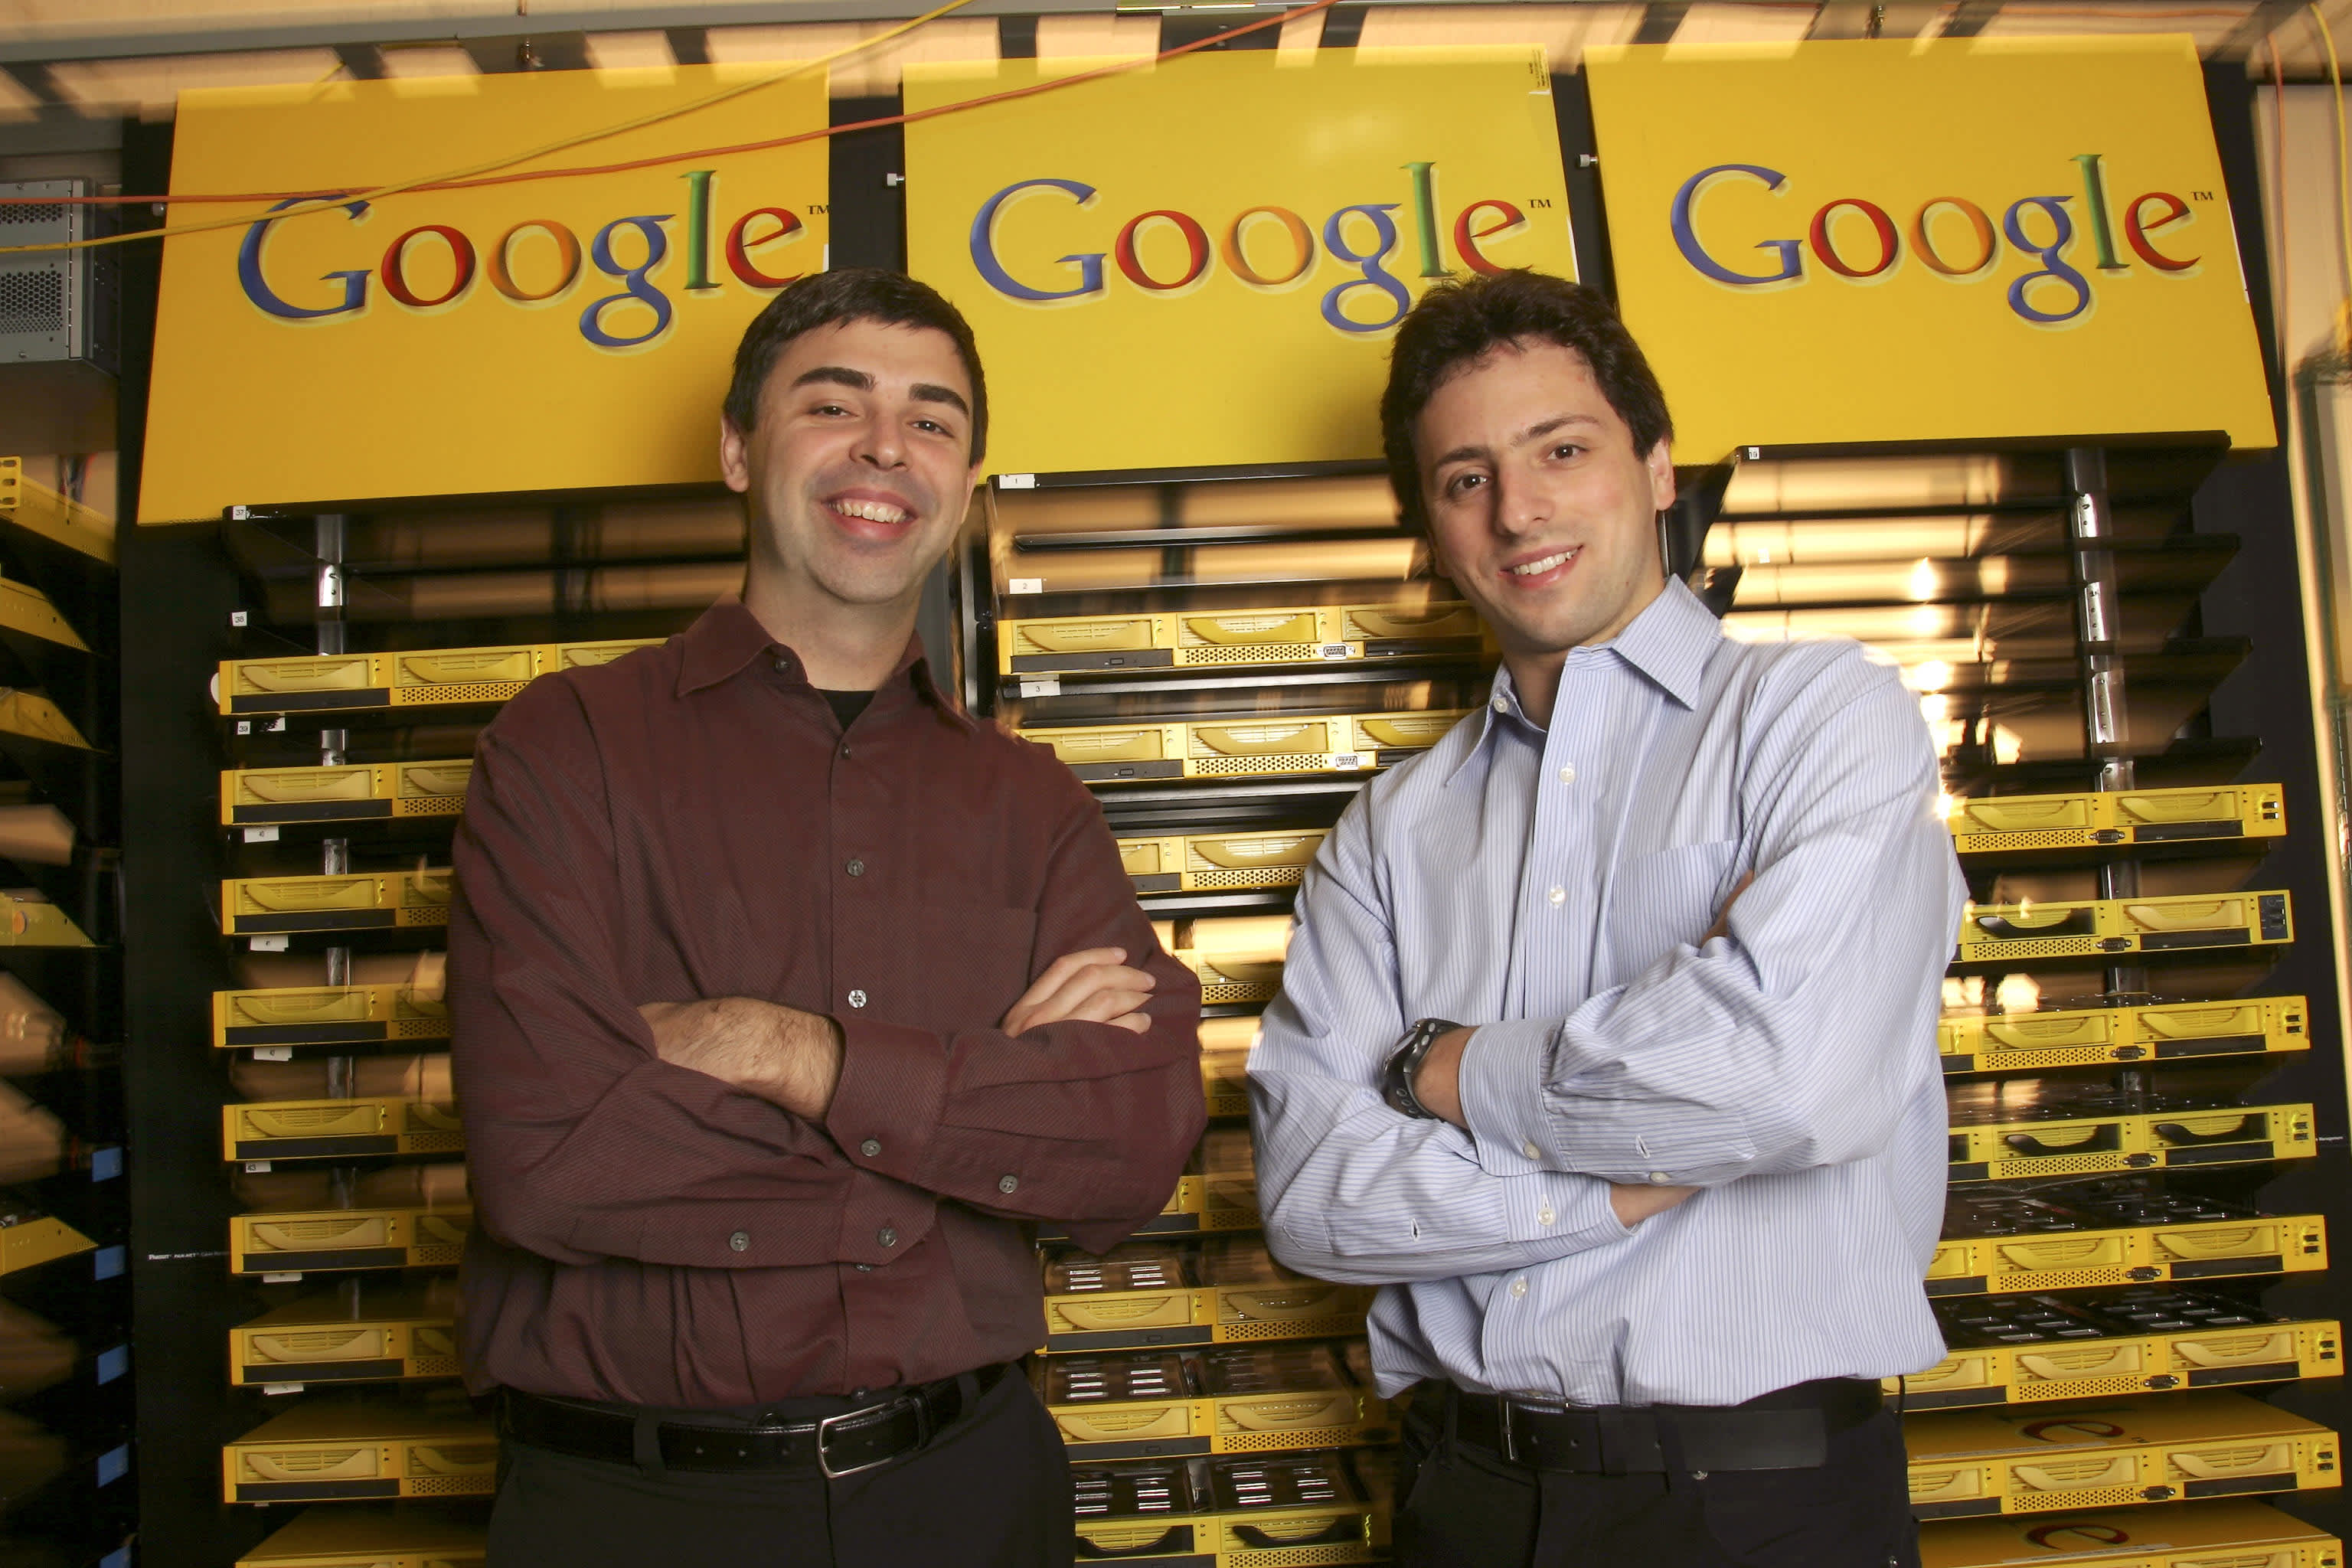 8 surprising facts you might not know about Google's early days